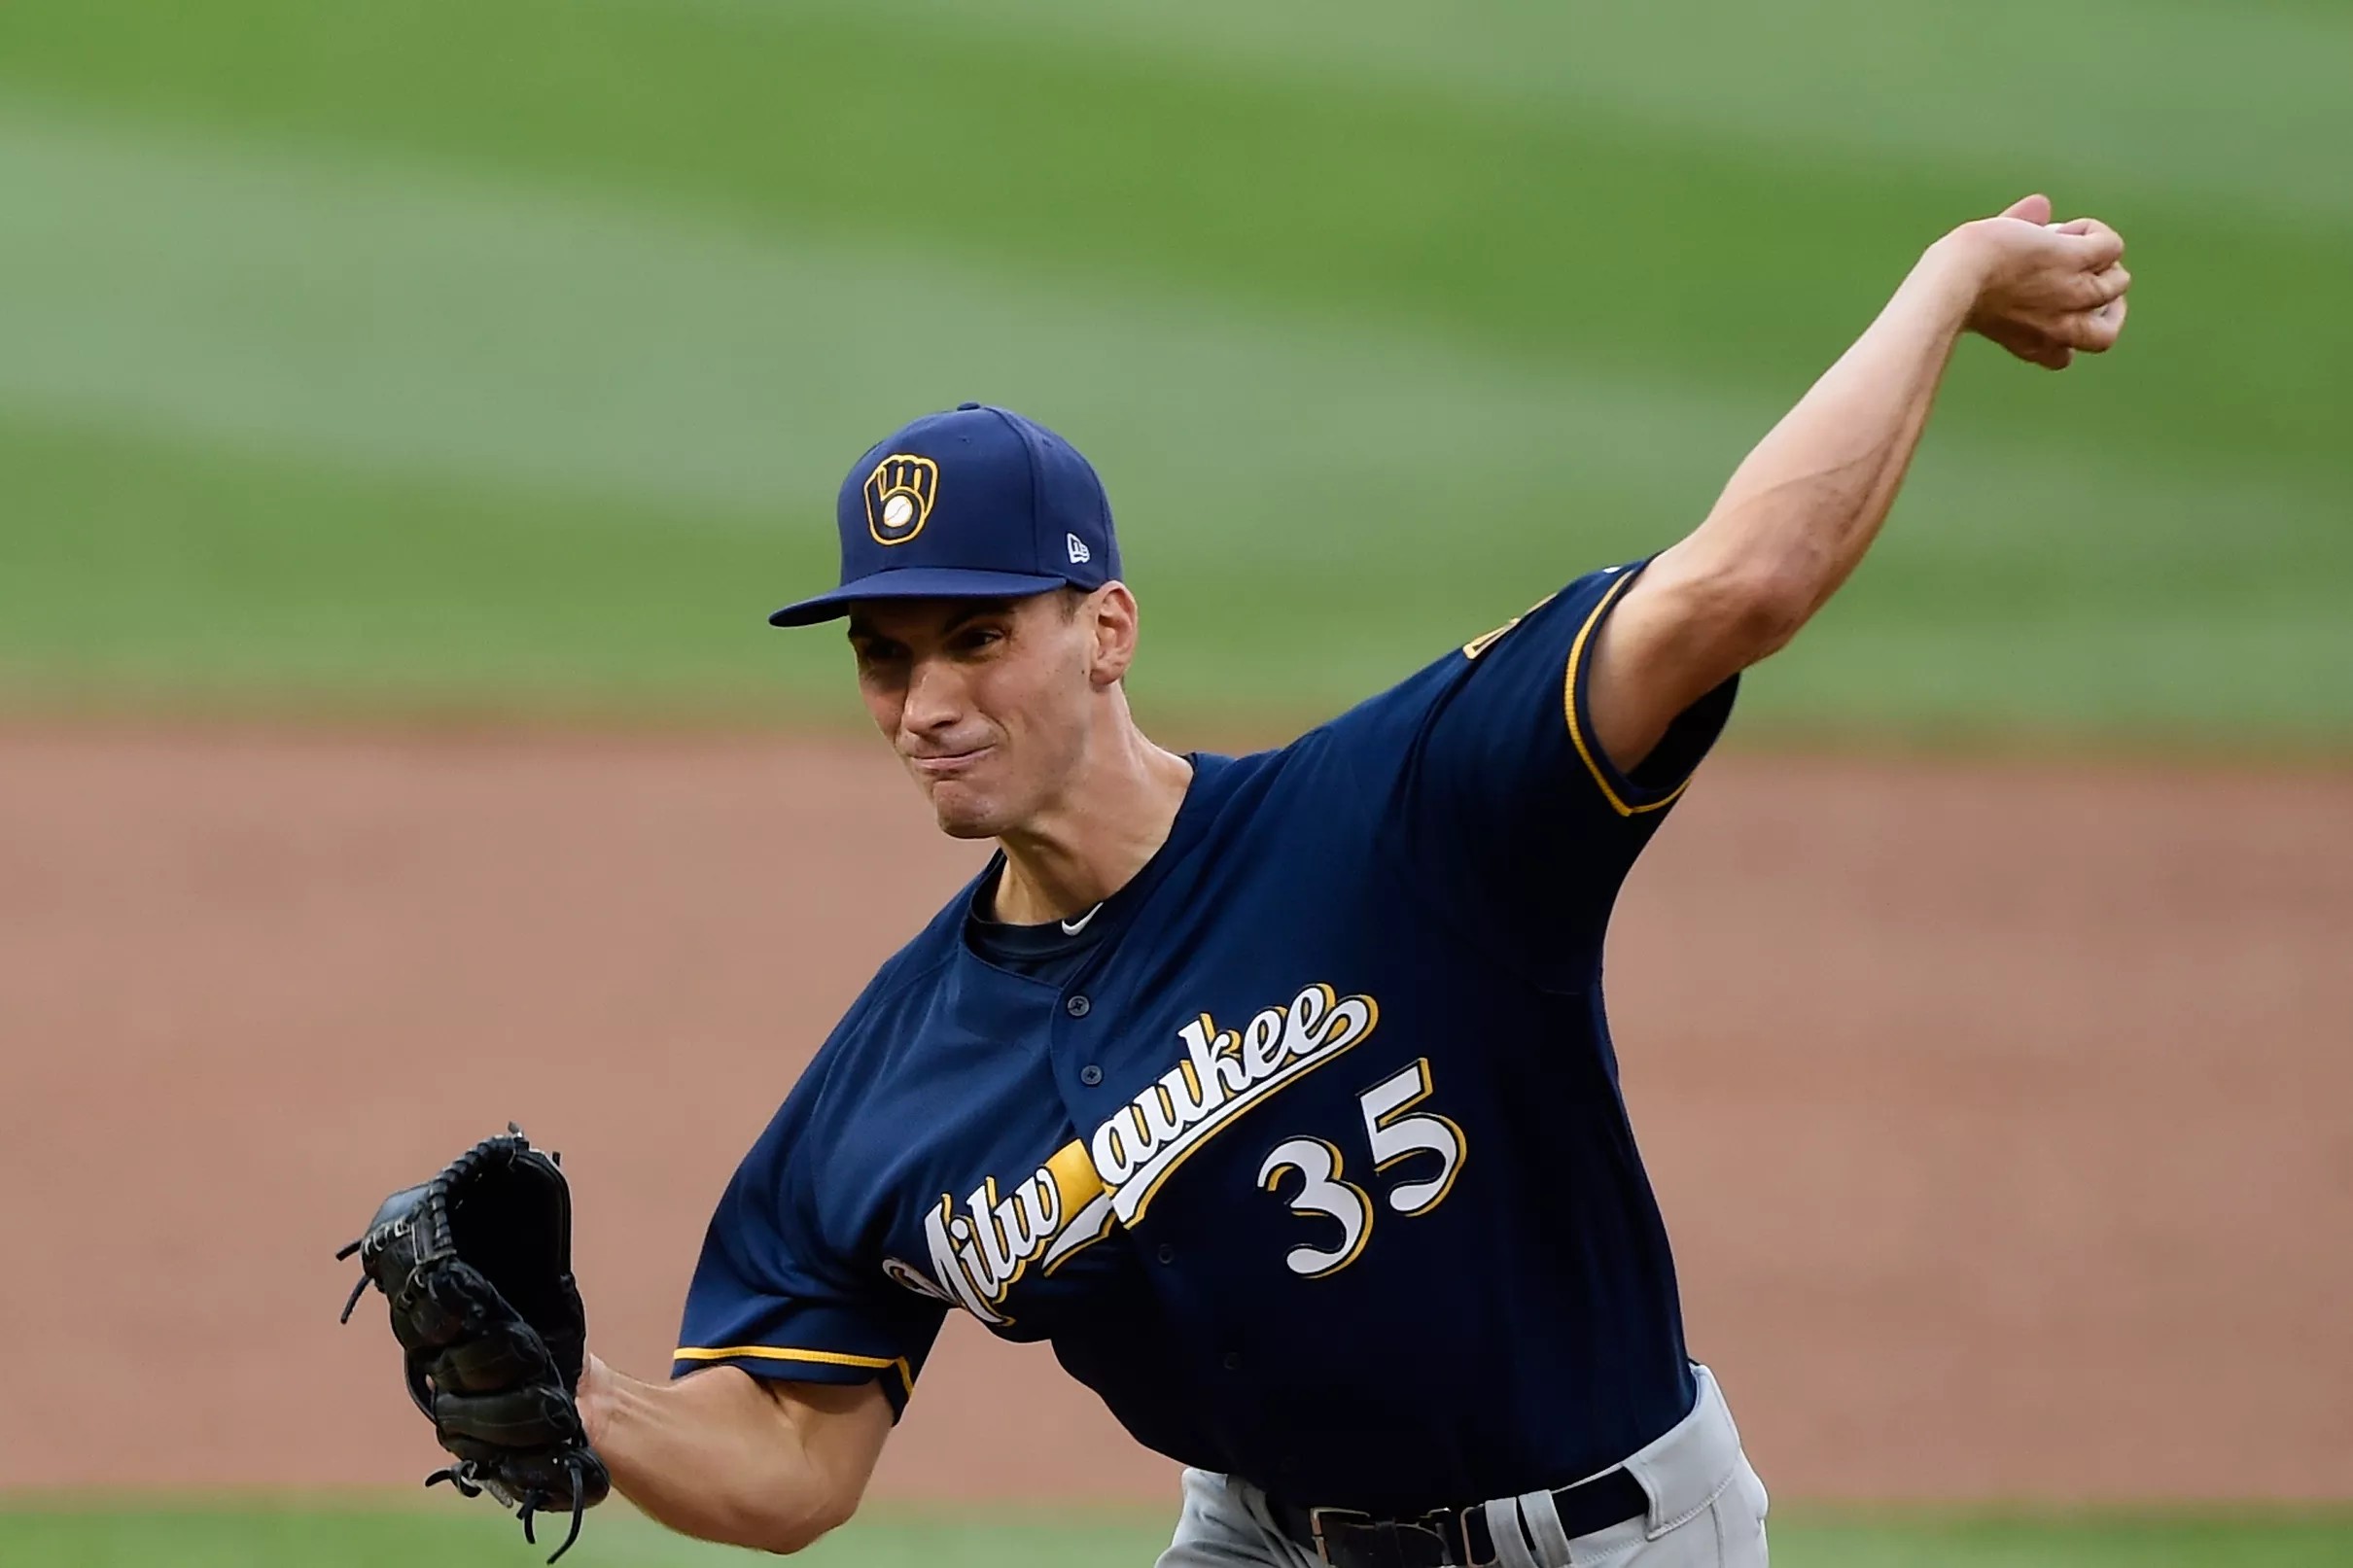 Milwaukee Brewers announce Brent Suter as Sunday’s starter against